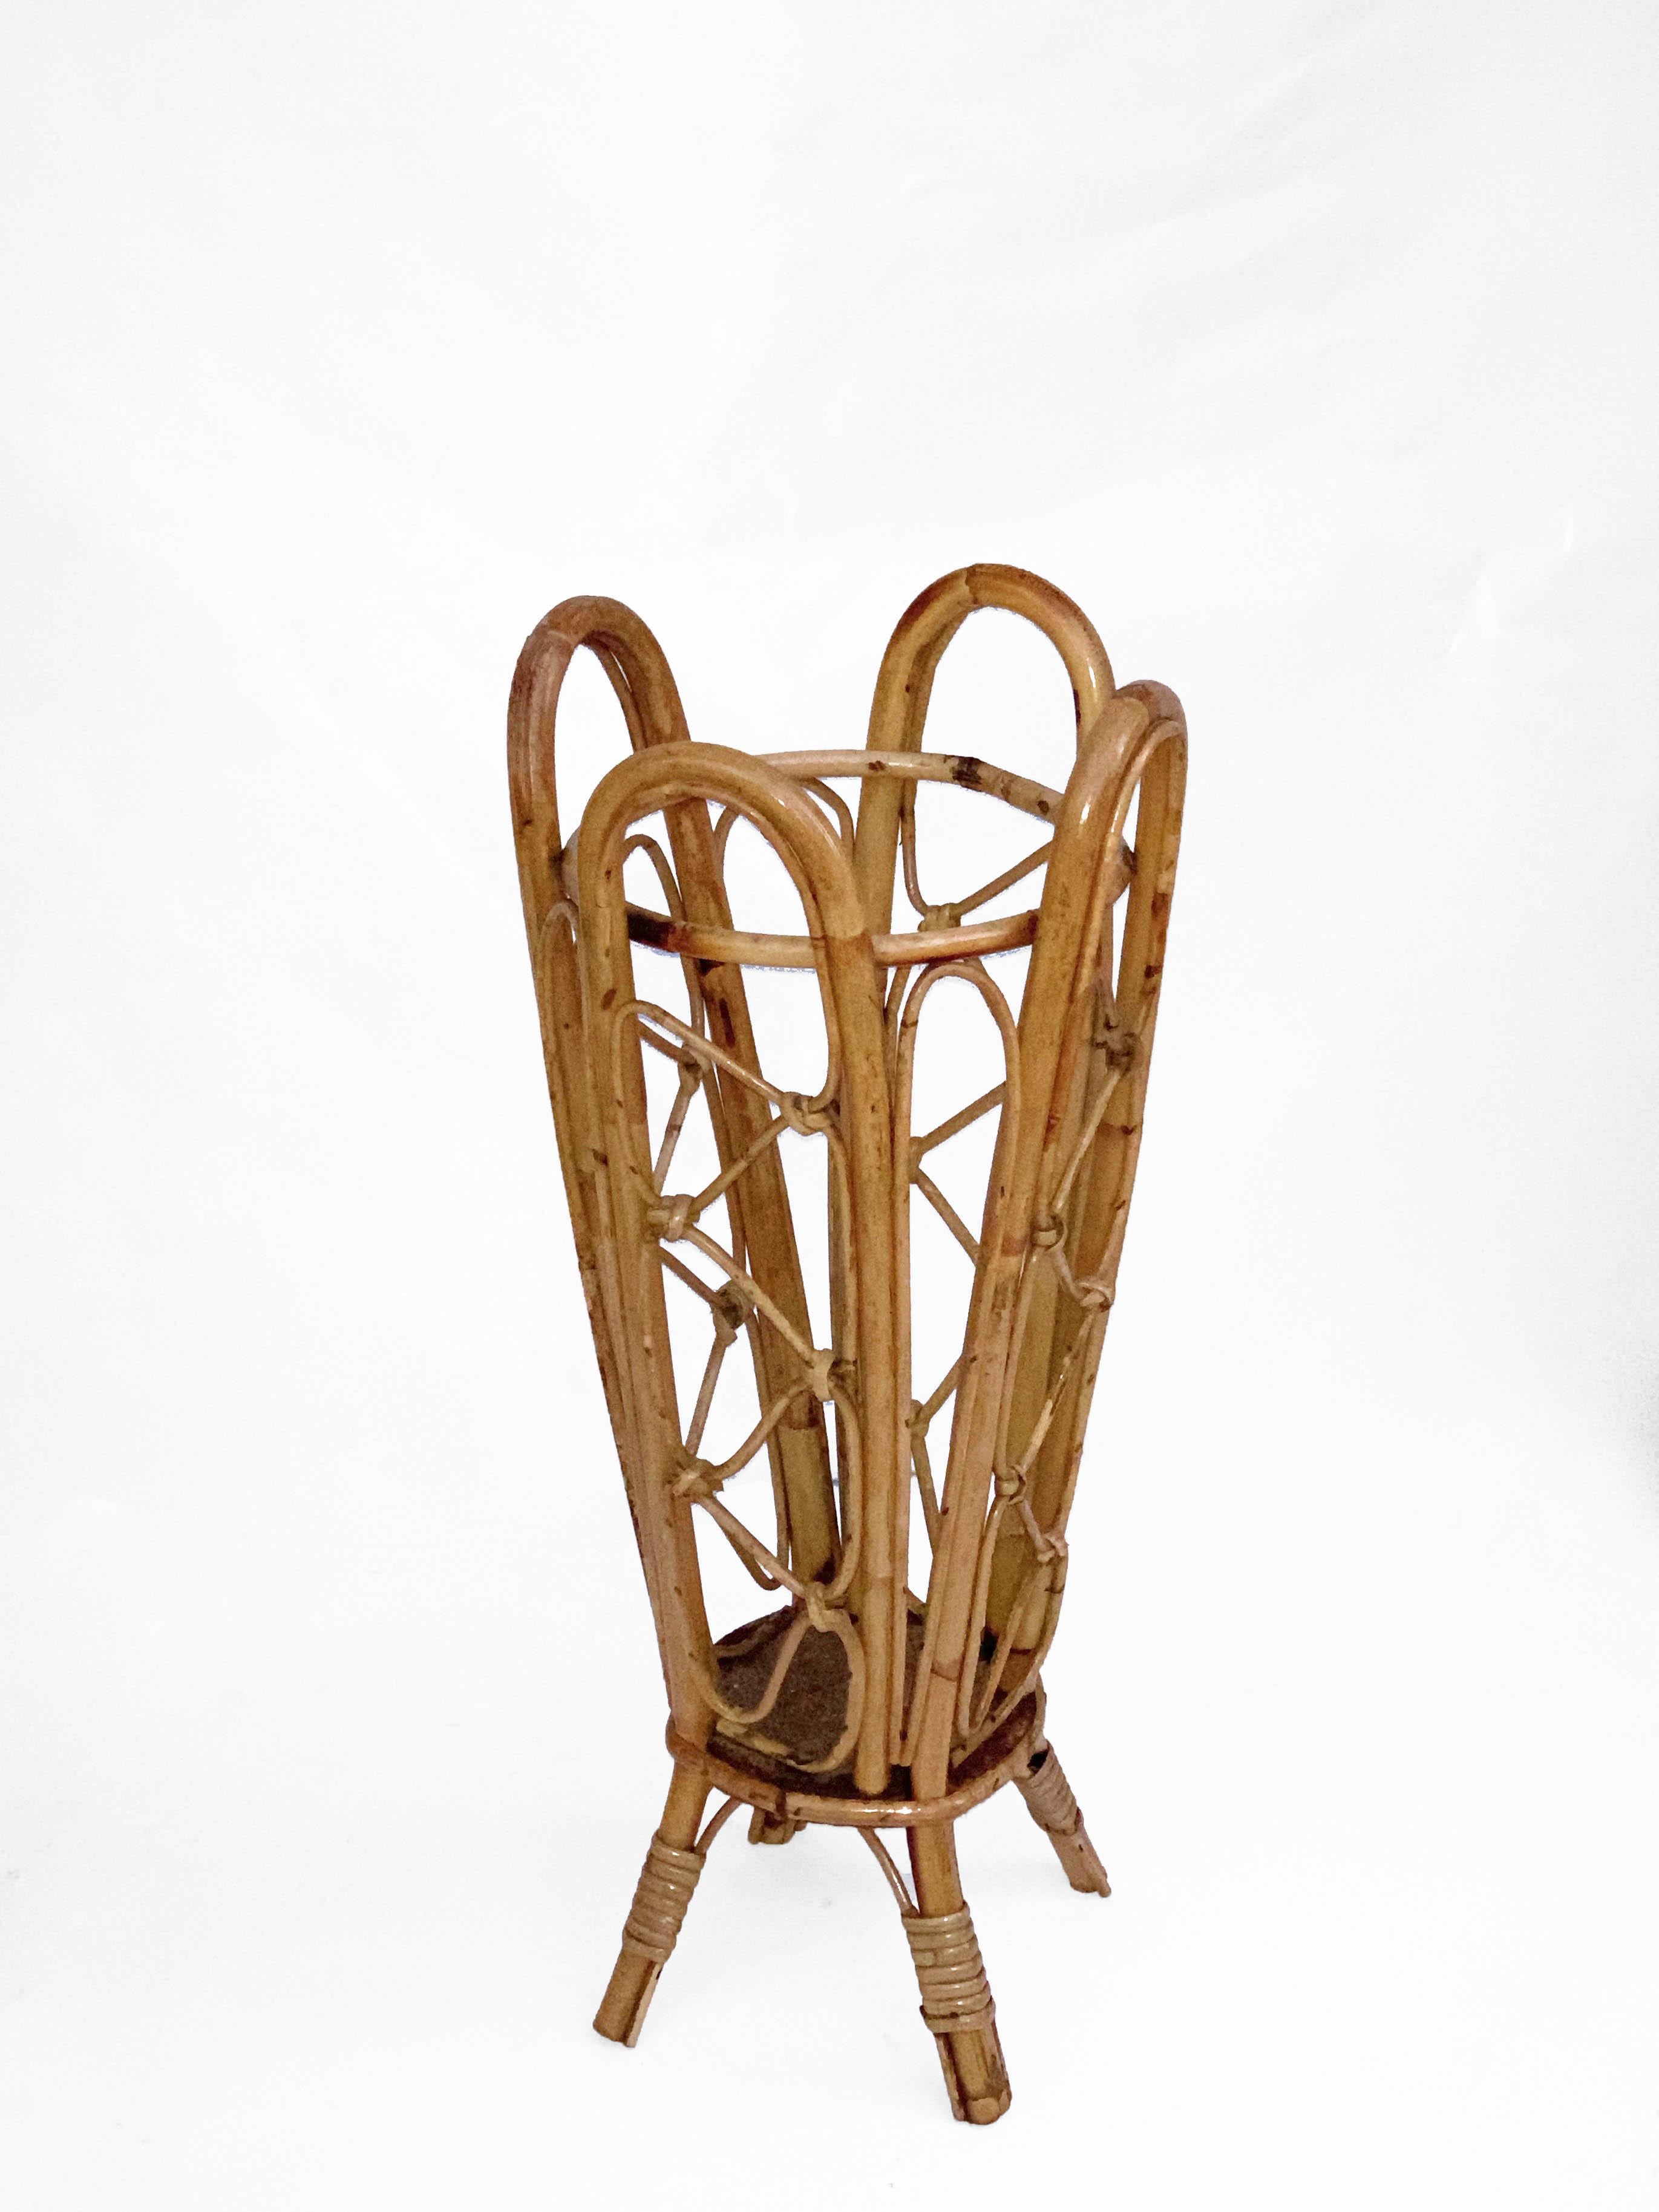 20th Century Bamboo and Wicker Umbrella Stand in the Style of Franco Albini, Italy, 1960s For Sale